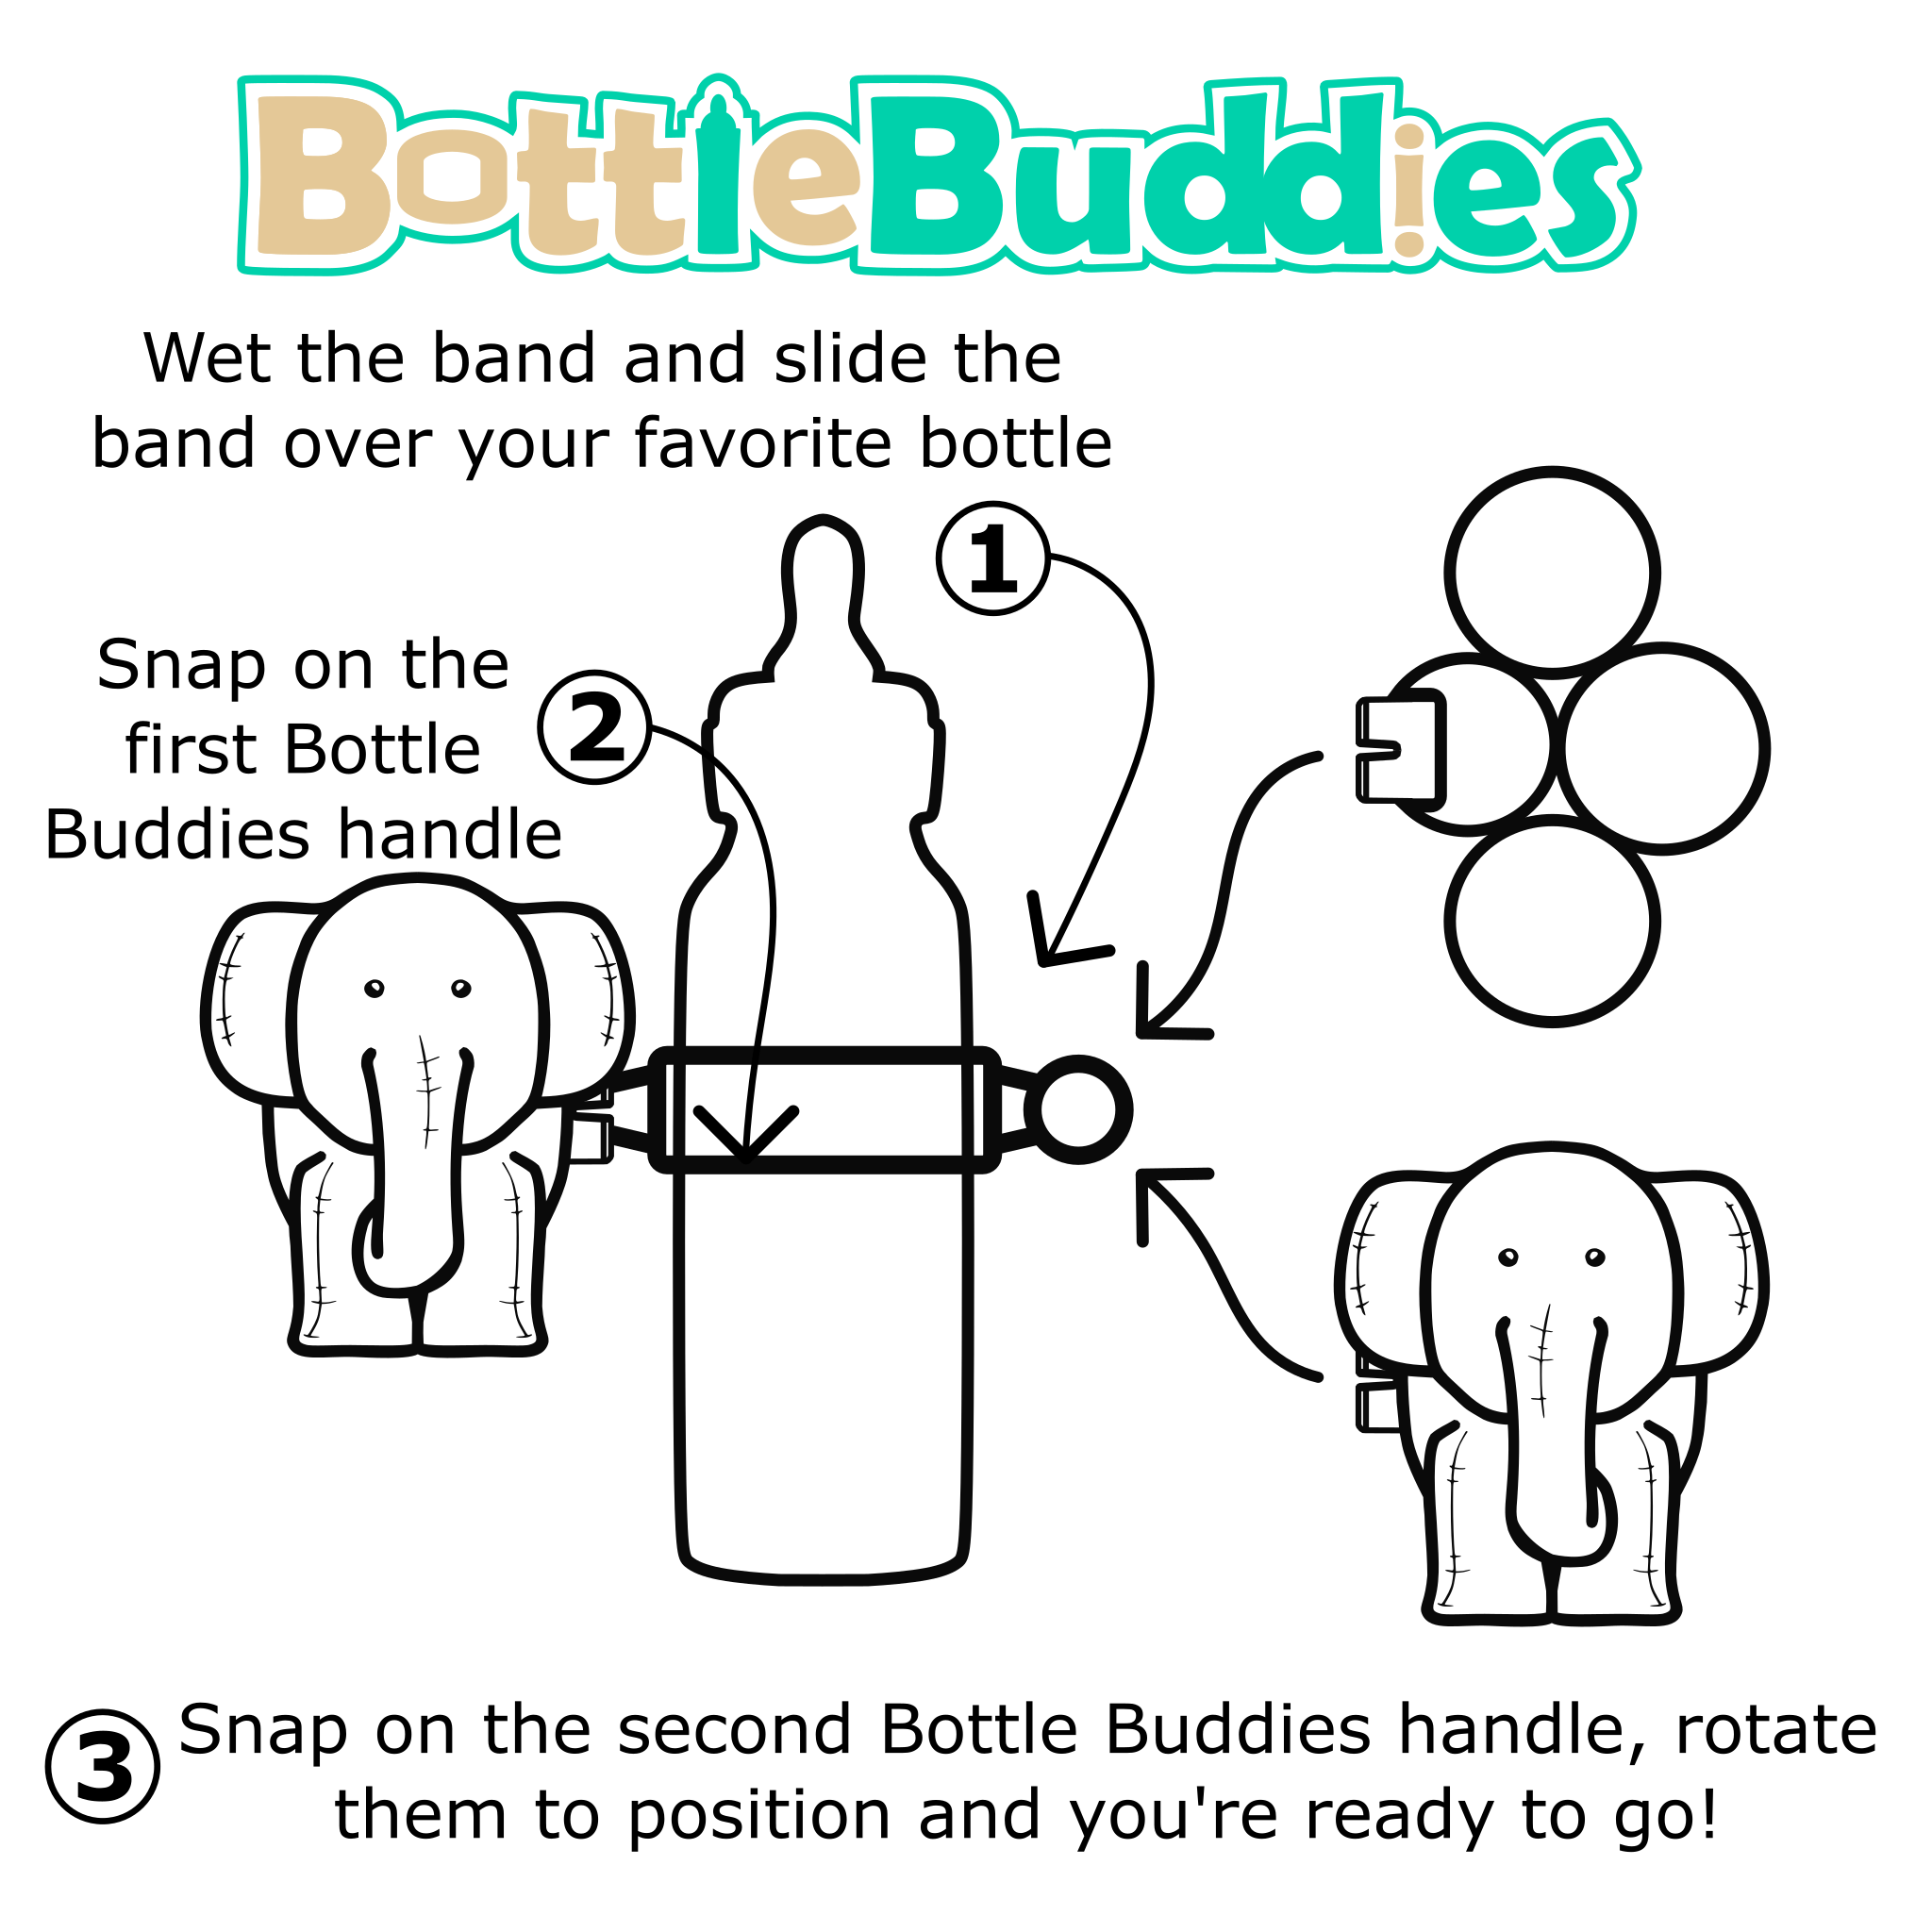 Bottle Buddies How to Image